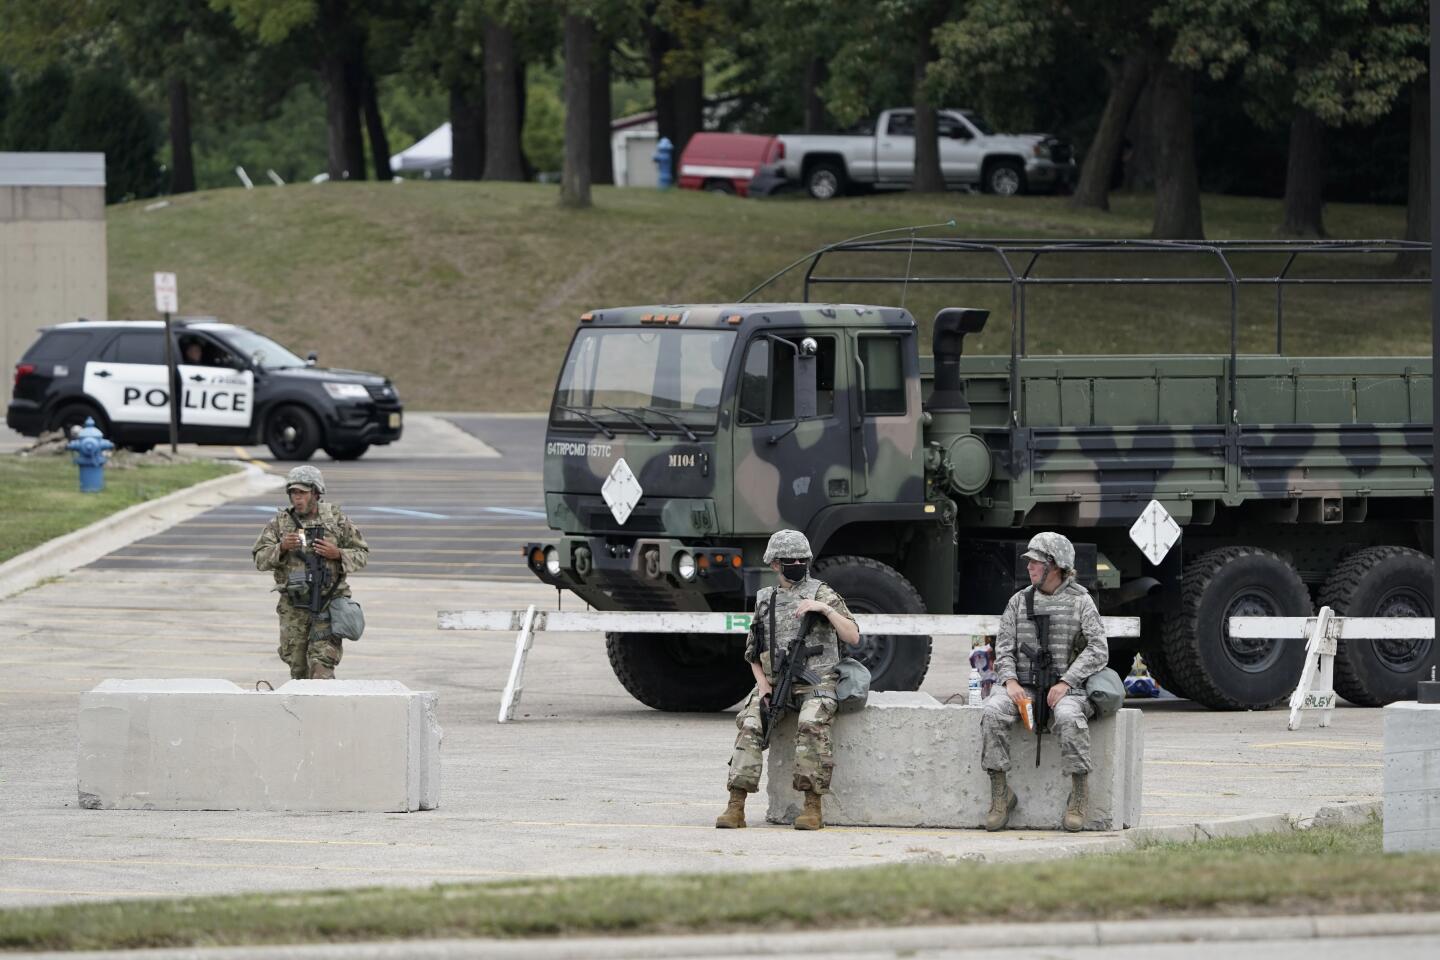 National Guard soldiers supplement local police to secure a school in Kenosha, Wis., where Trump was visiting.